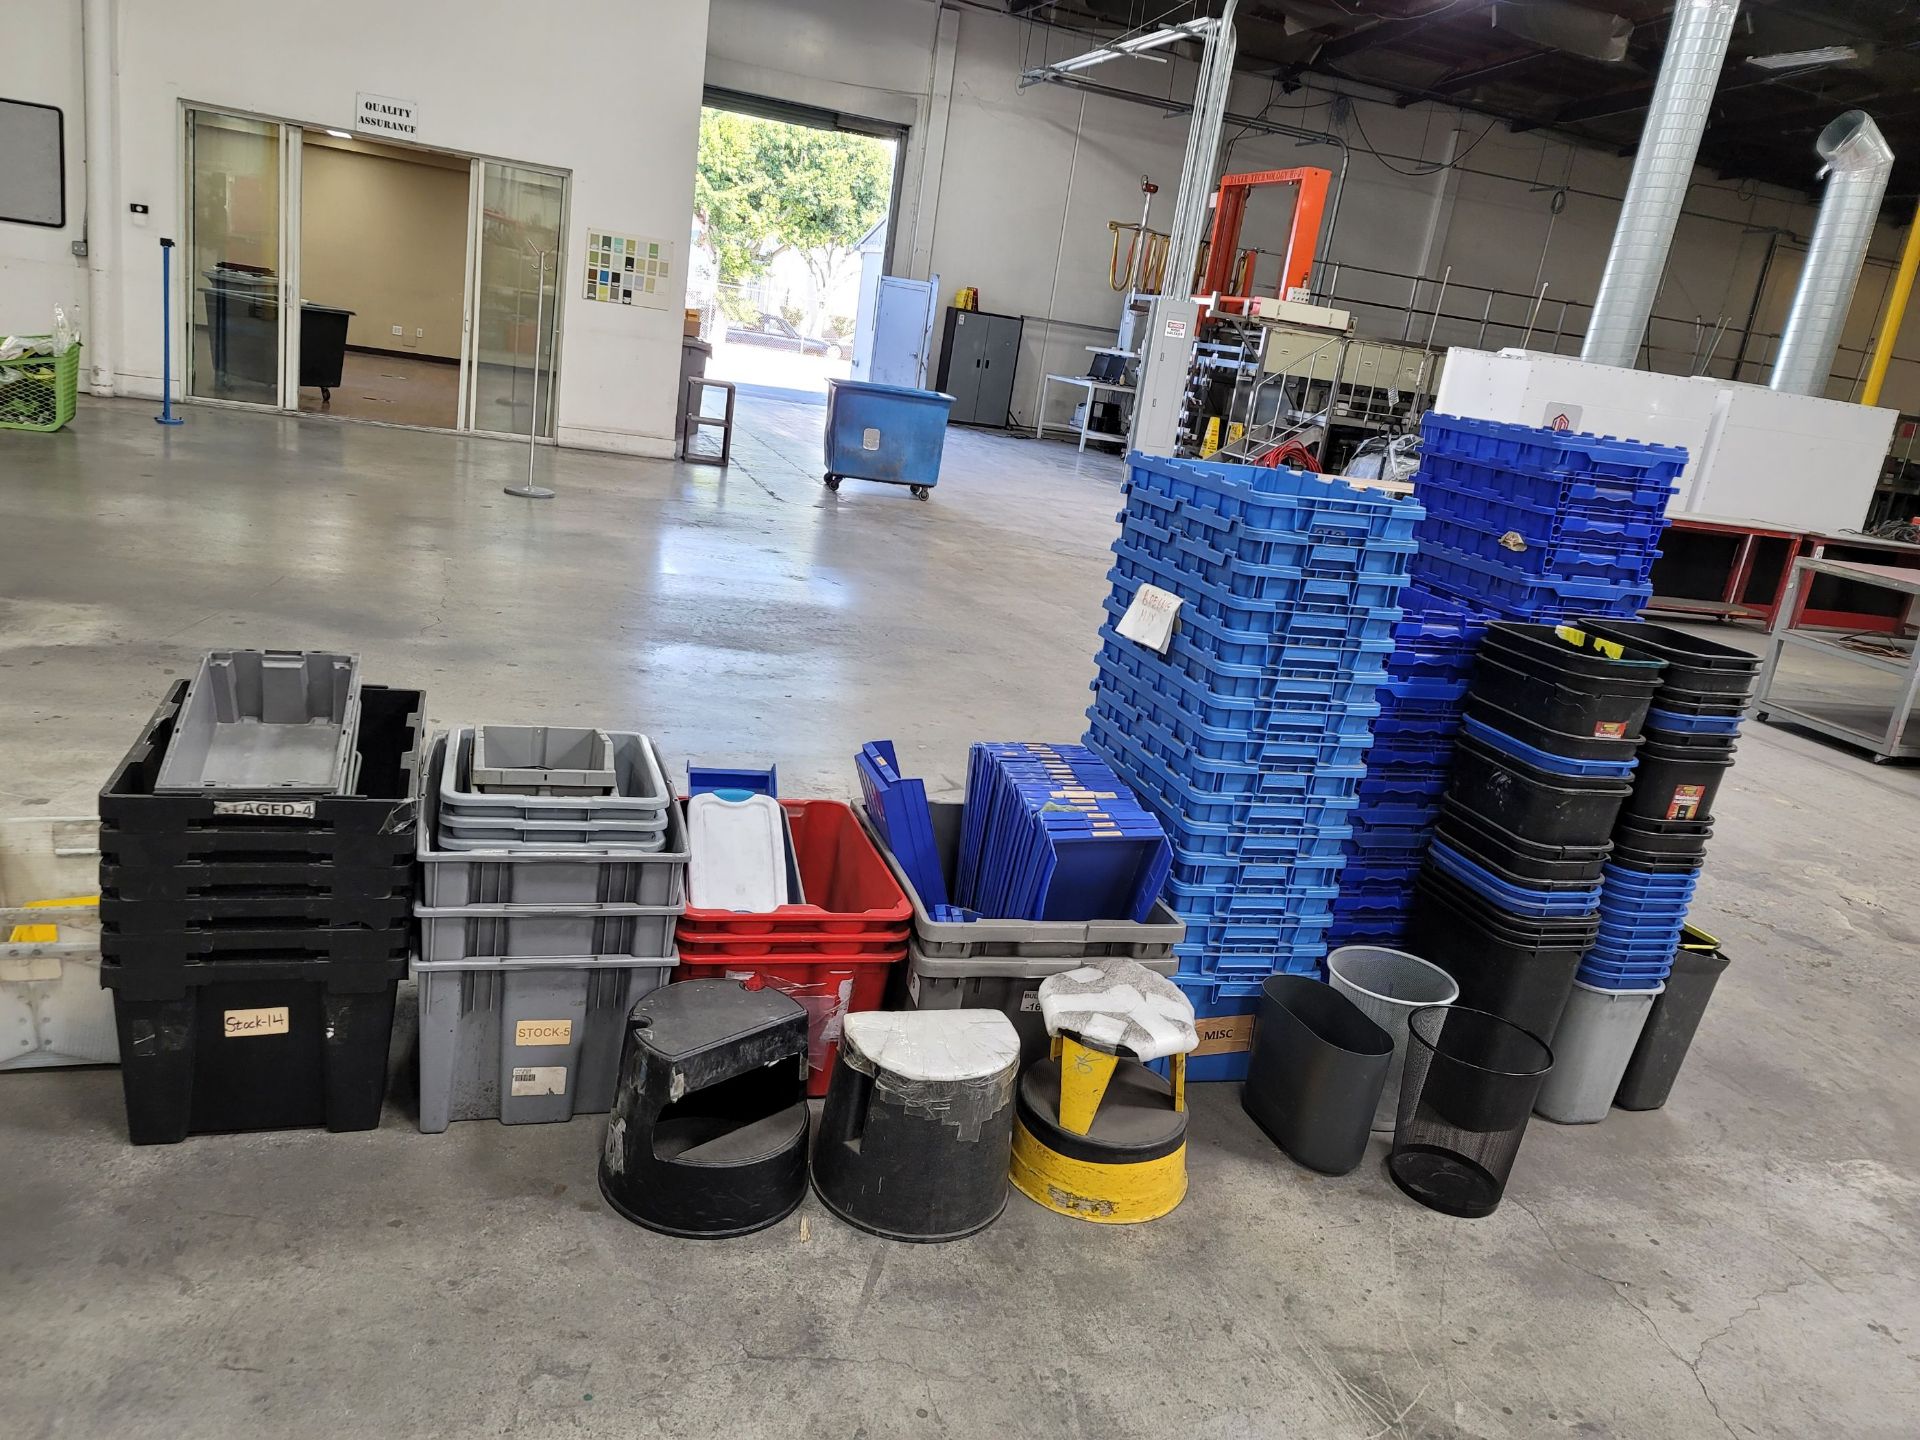 LOT - STACKABLE PLASTIC TUBS/BINS, VARIOUS SIZES, TRASH CANS, STEP STOOLS, ETC. - Image 3 of 3